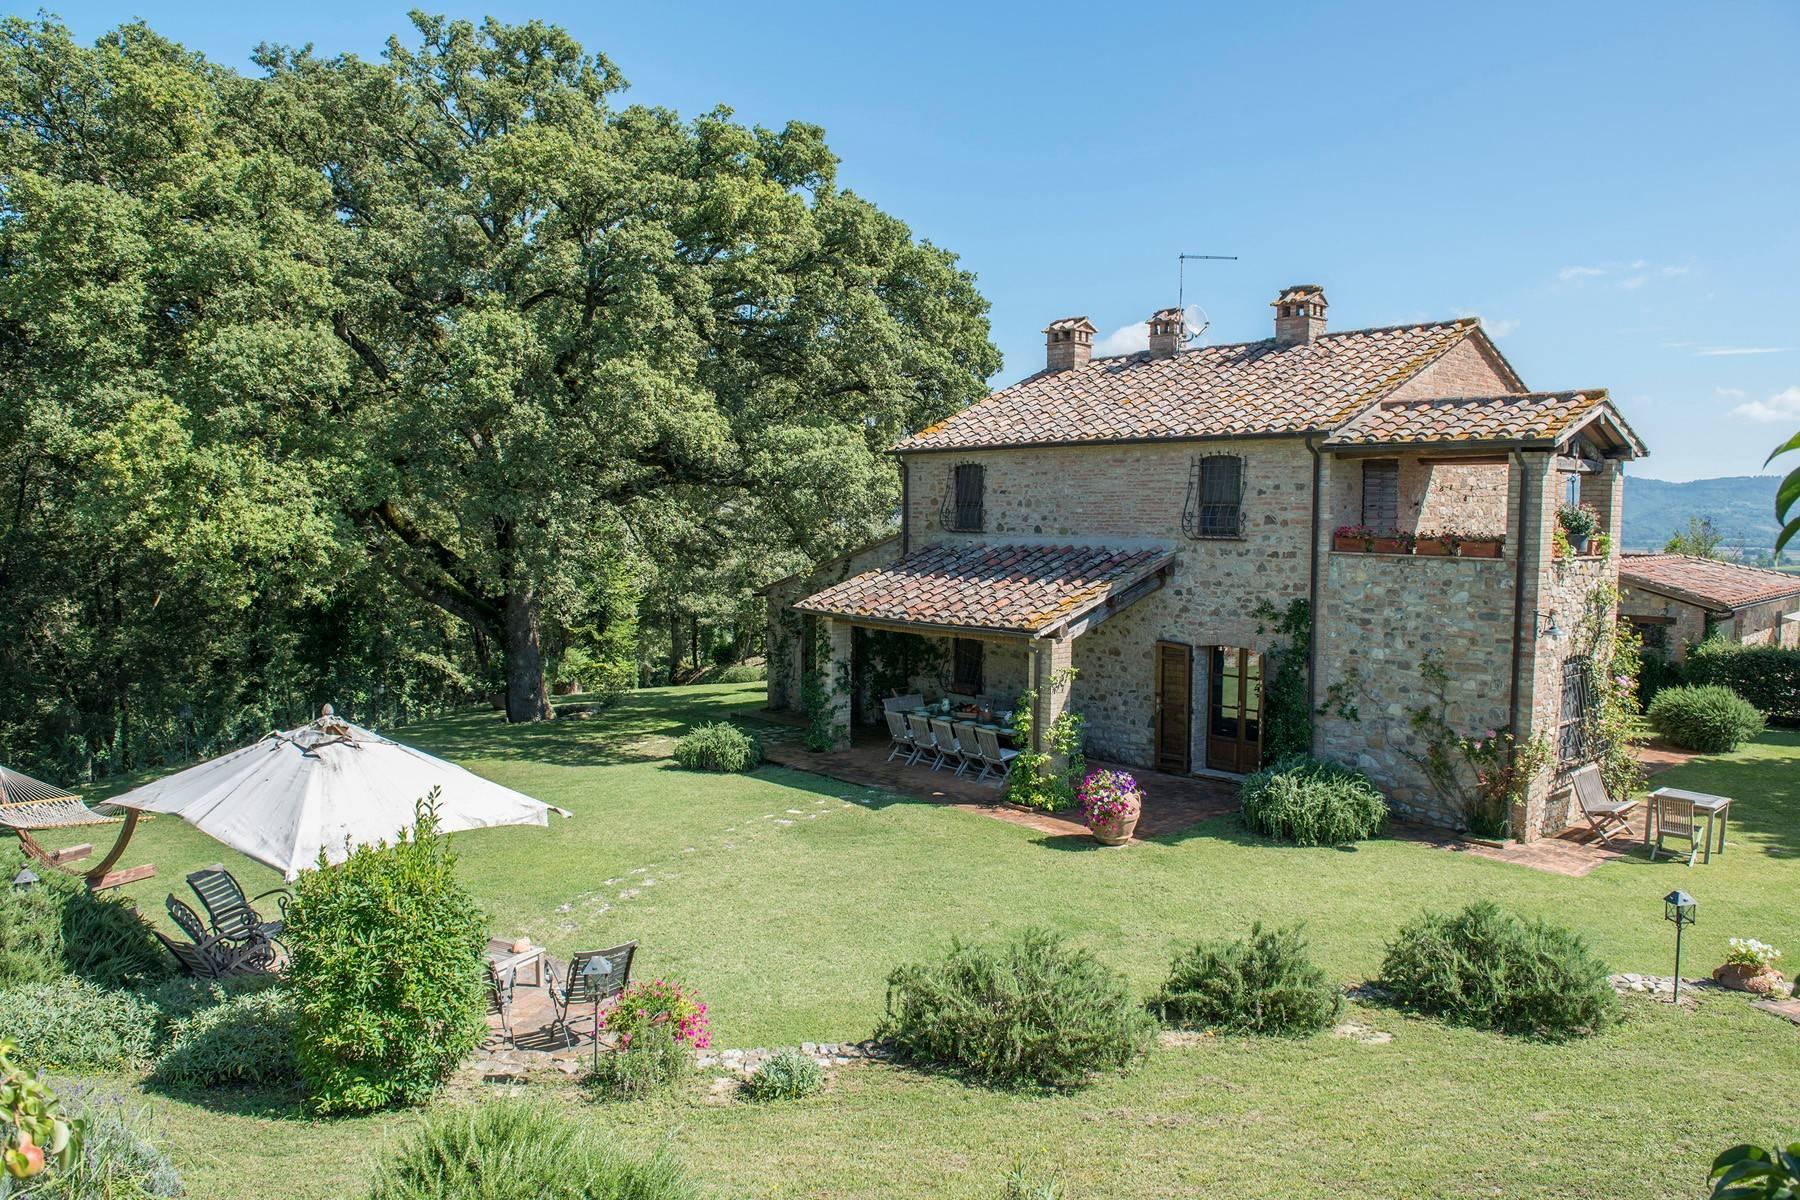 Stunning Farmhouse with pool on the border between Tuscany and Umbria - 1